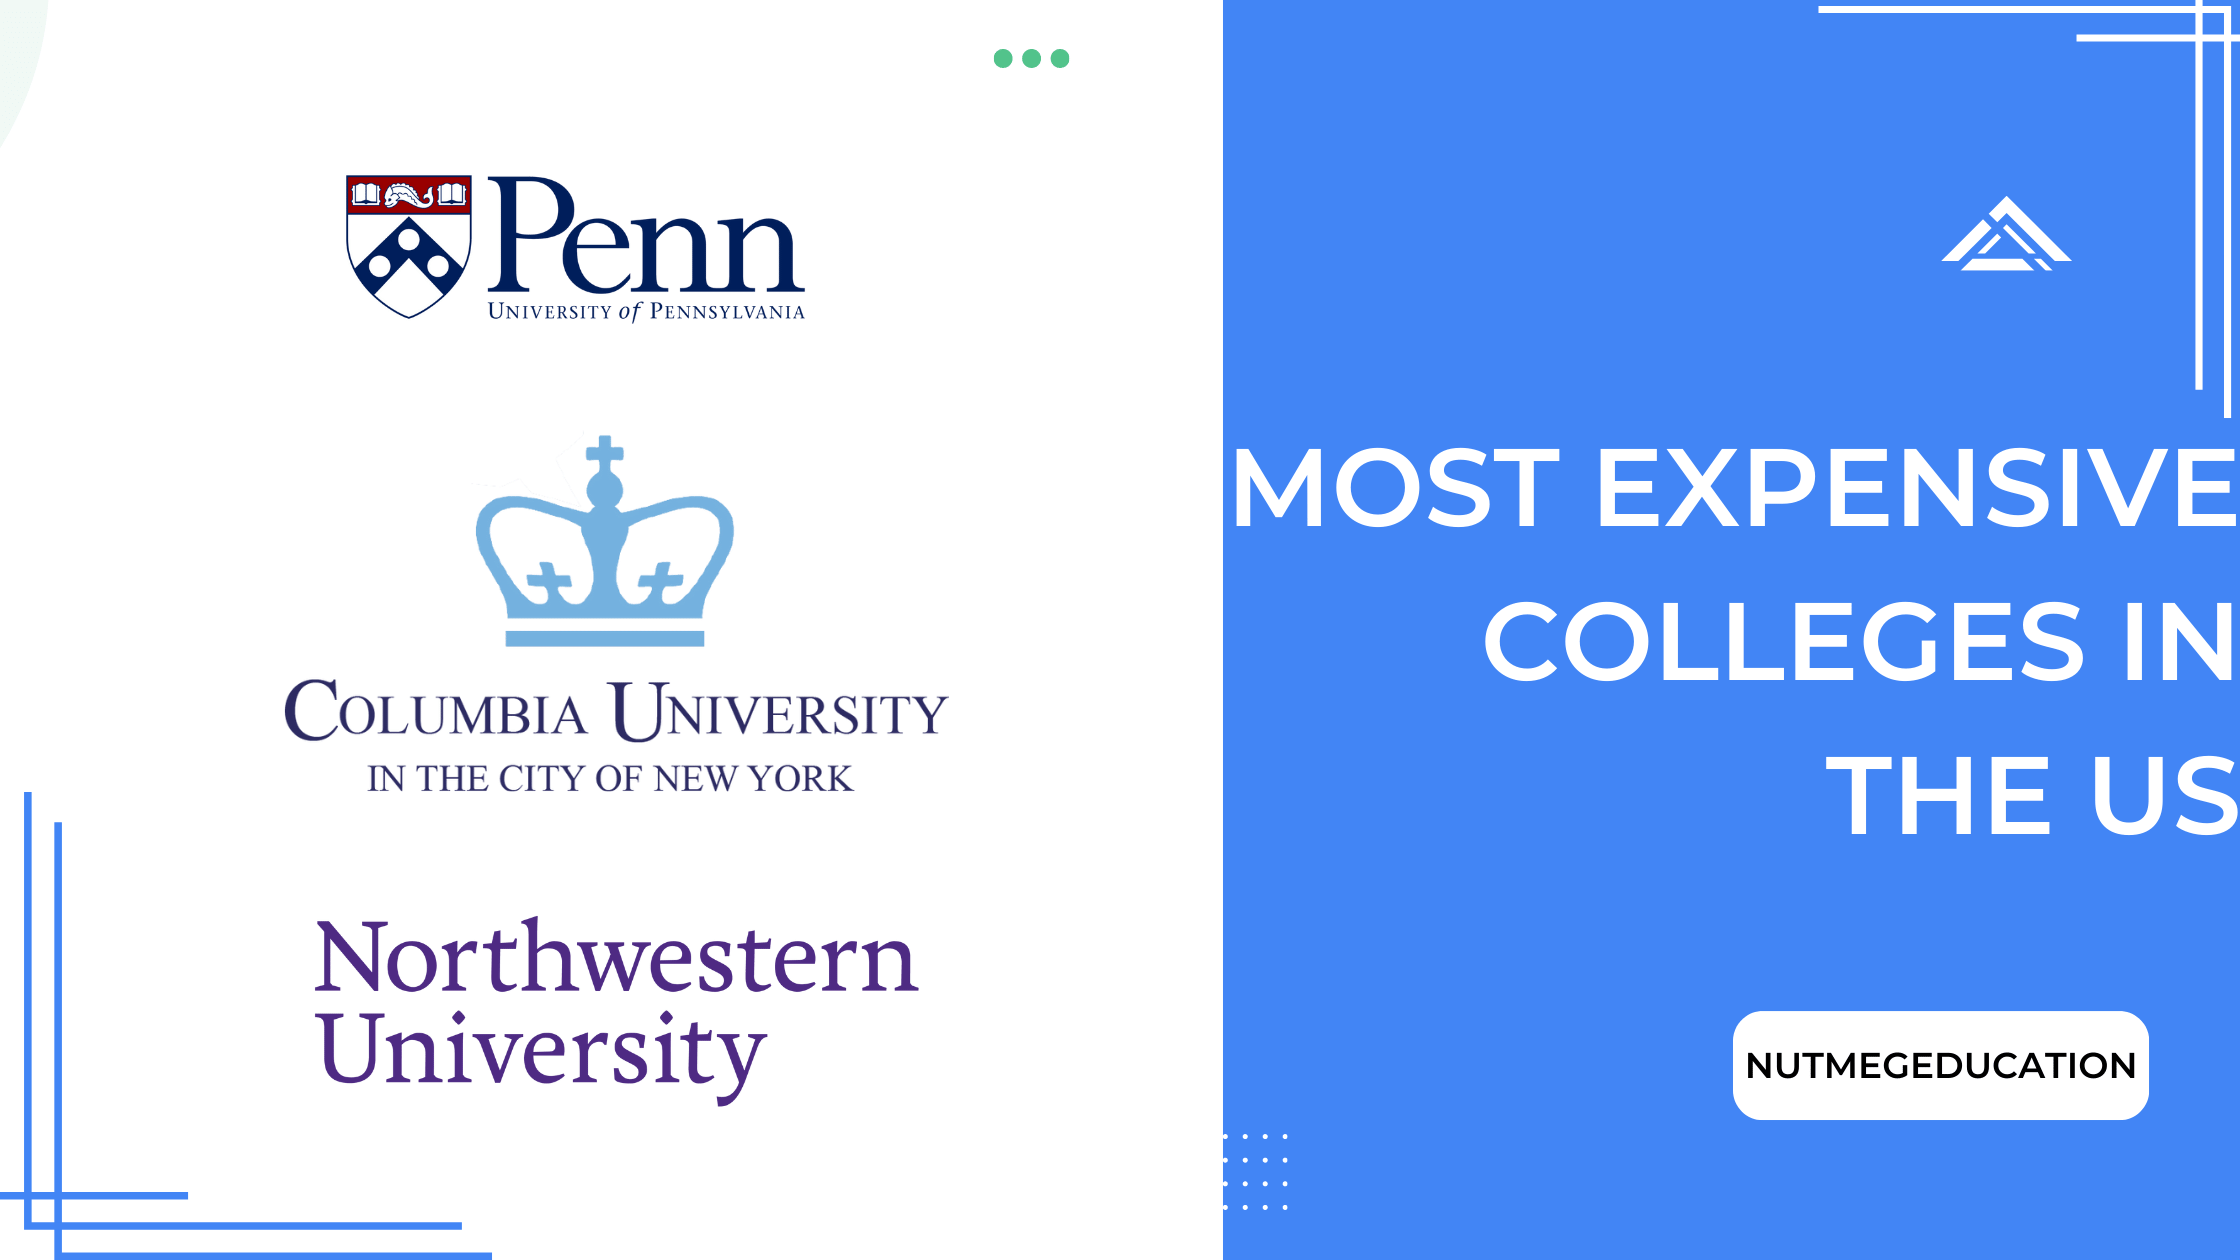 Most Expensive Colleges In The US - NutMegEducation